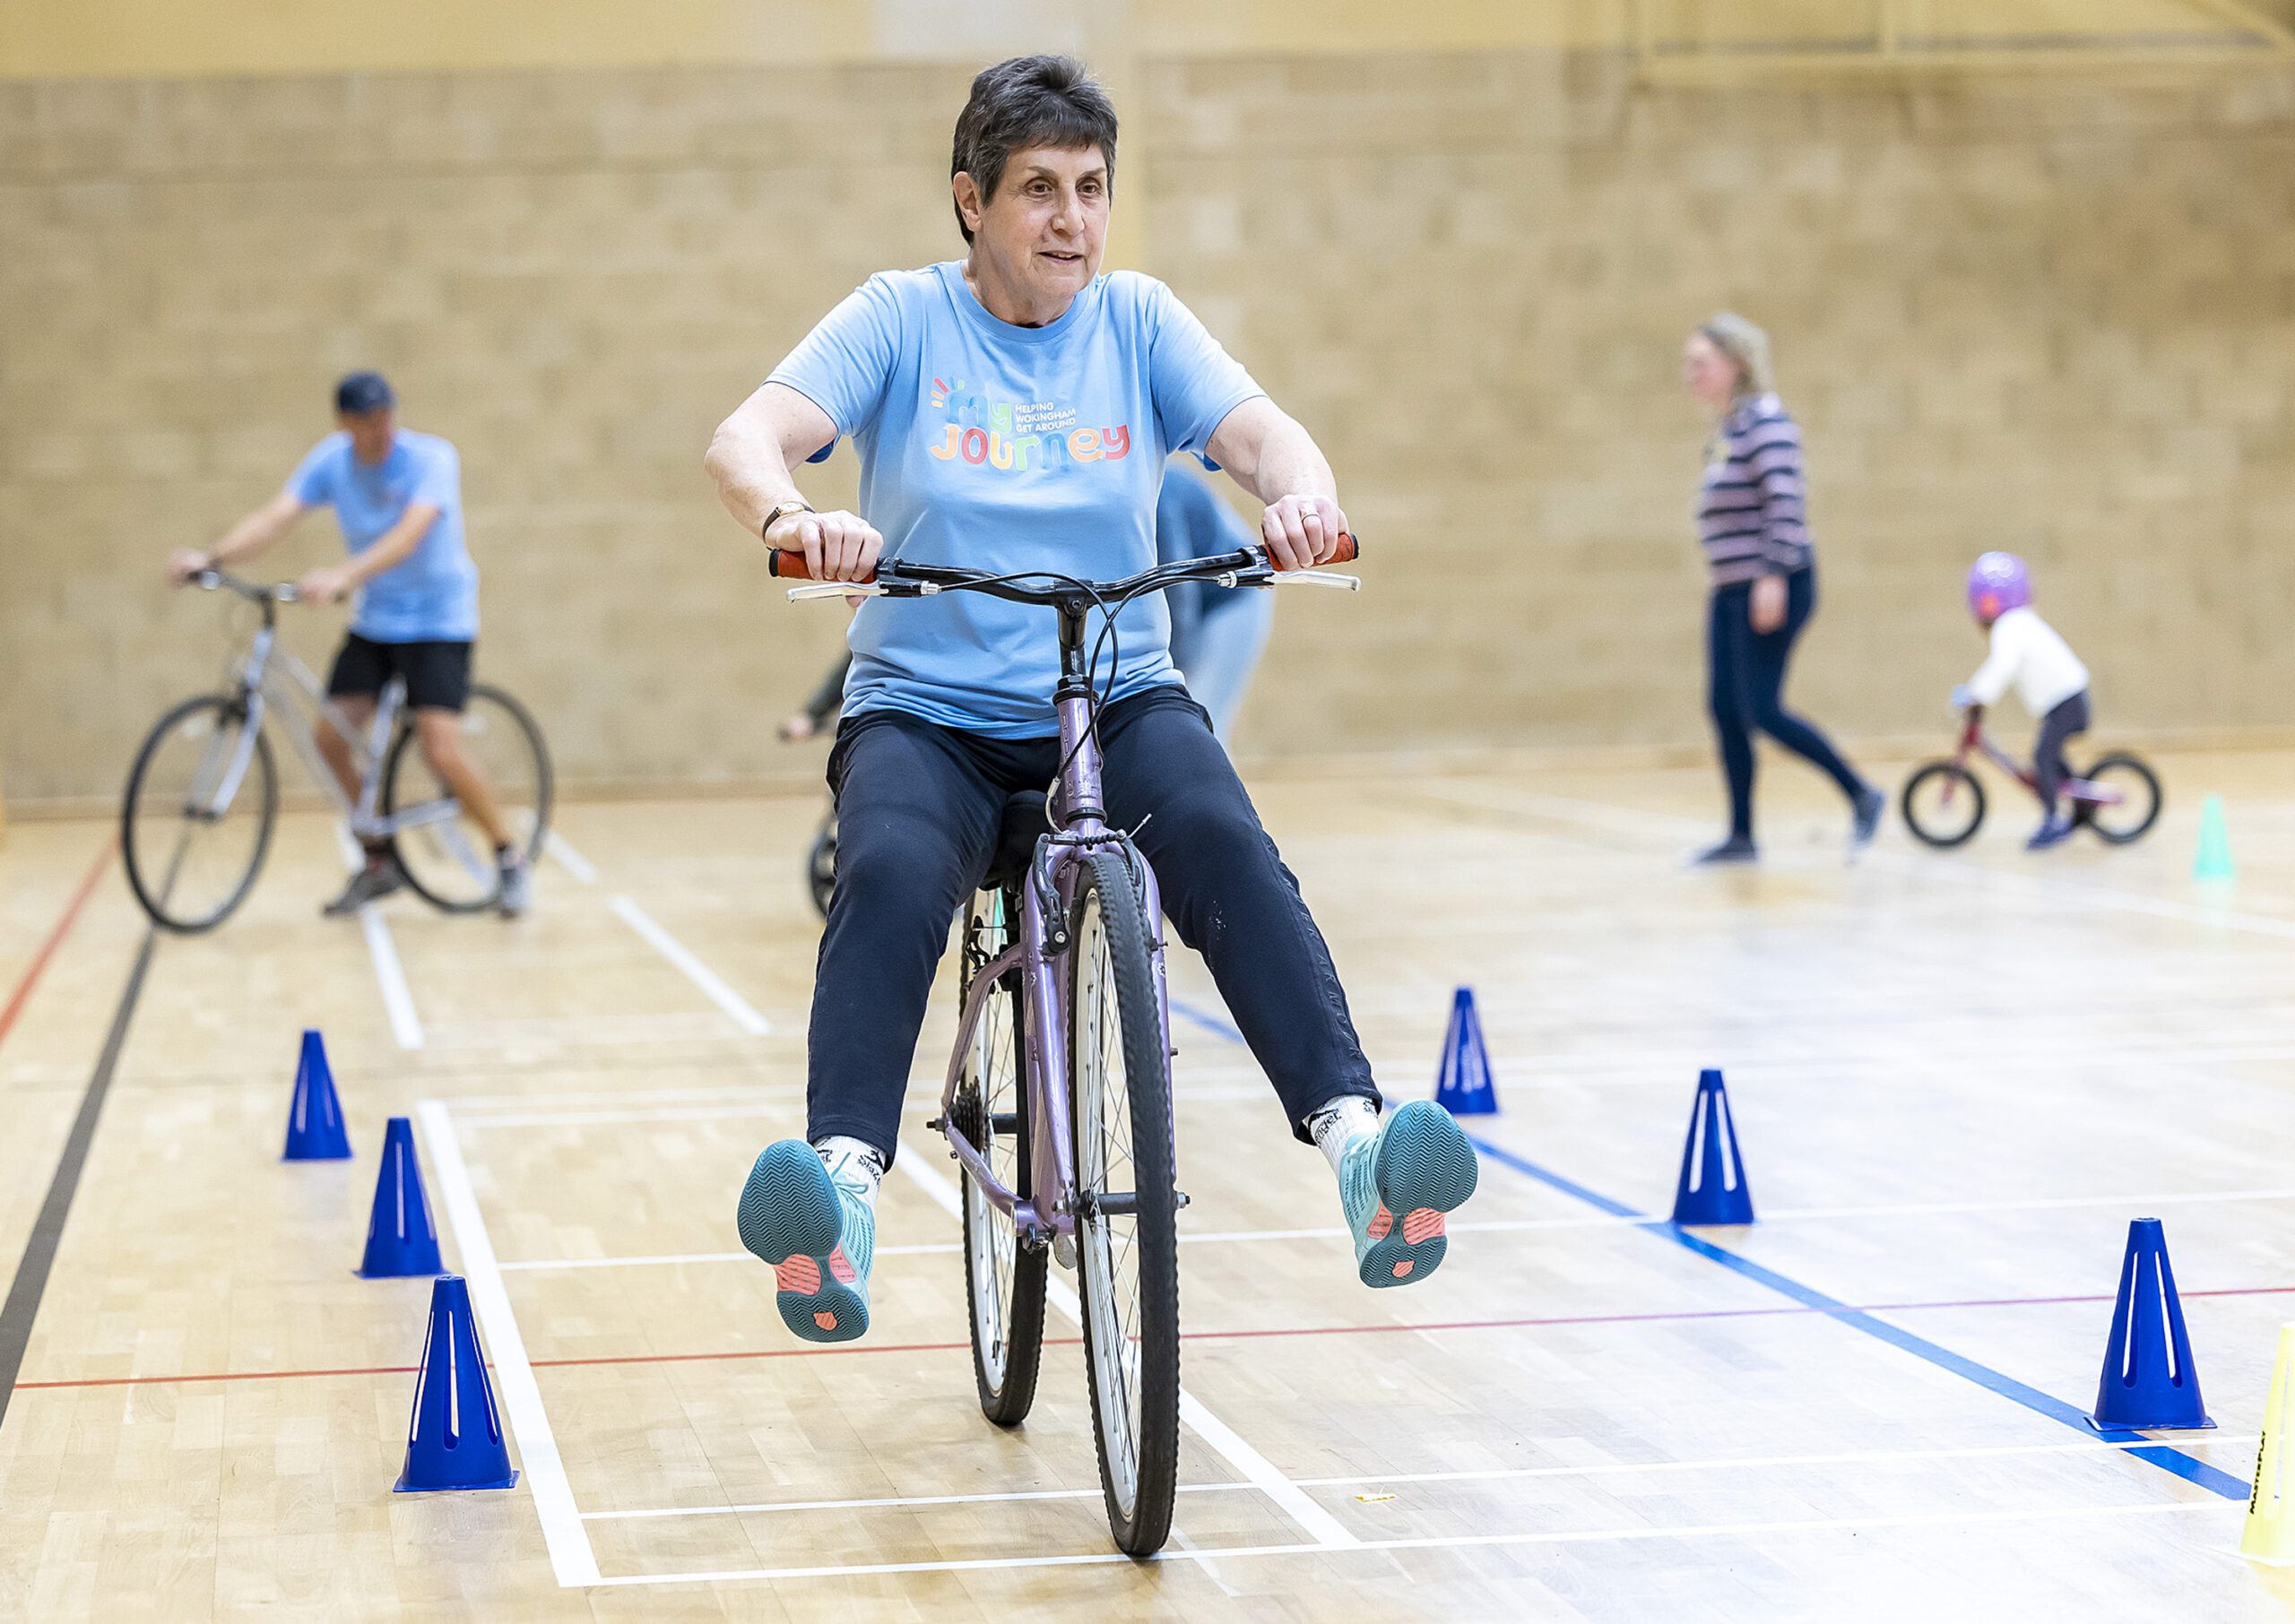 A woman on a bicycle with her legs up as she enjoys gliding through some cones in a gym